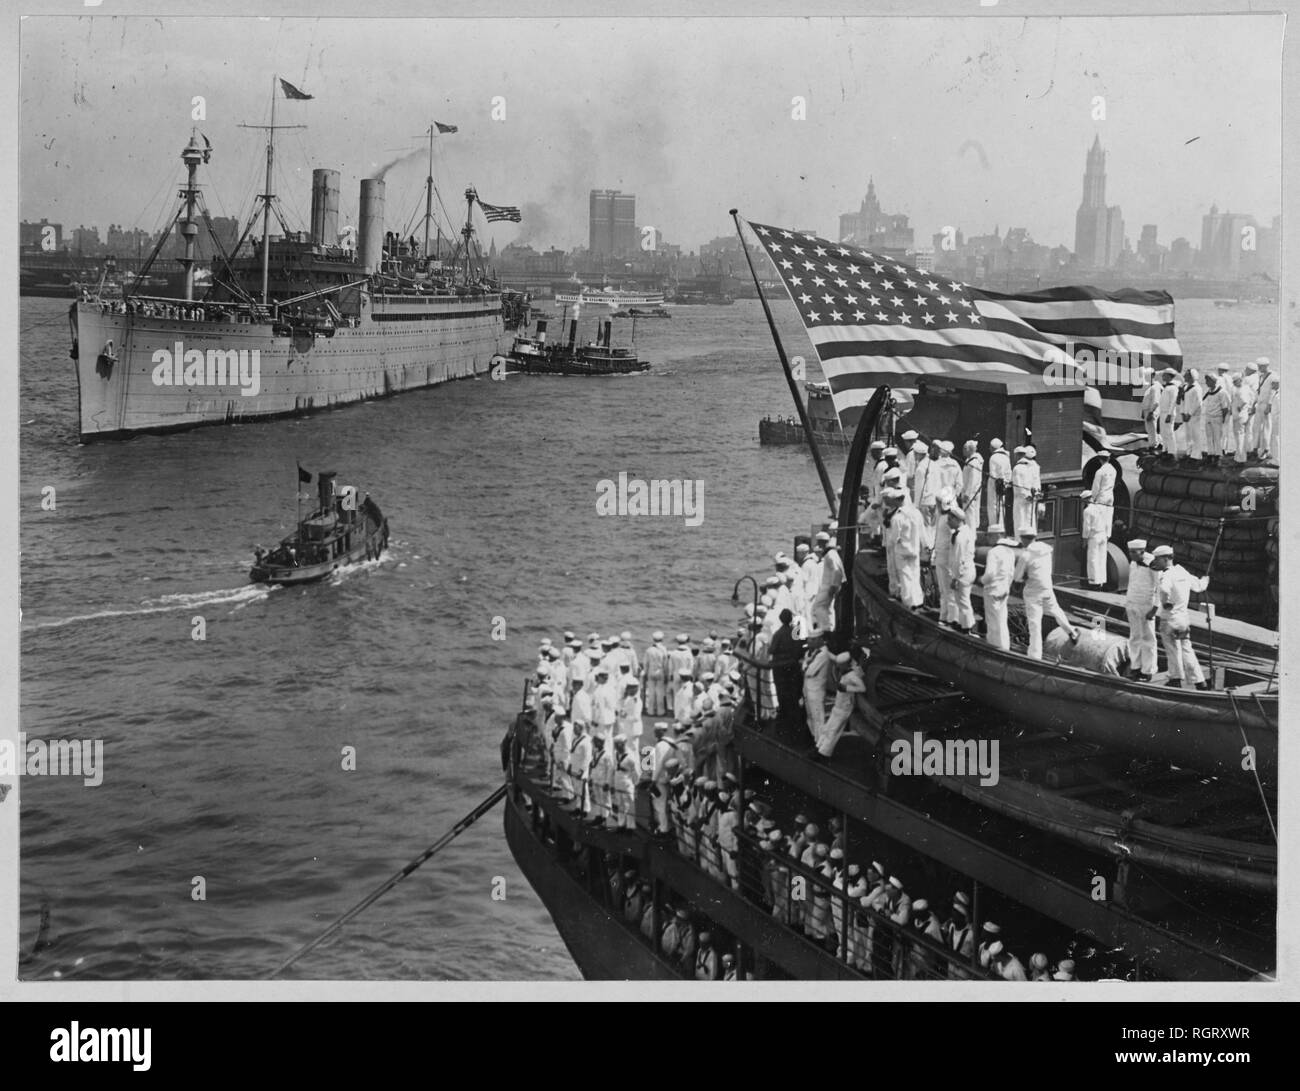 Arrives in New York Harbor with President Woodrow Wilson and his party on board, as they return to the U.S. from the World War I peace c.jpg - RGRXWR Stock Photo